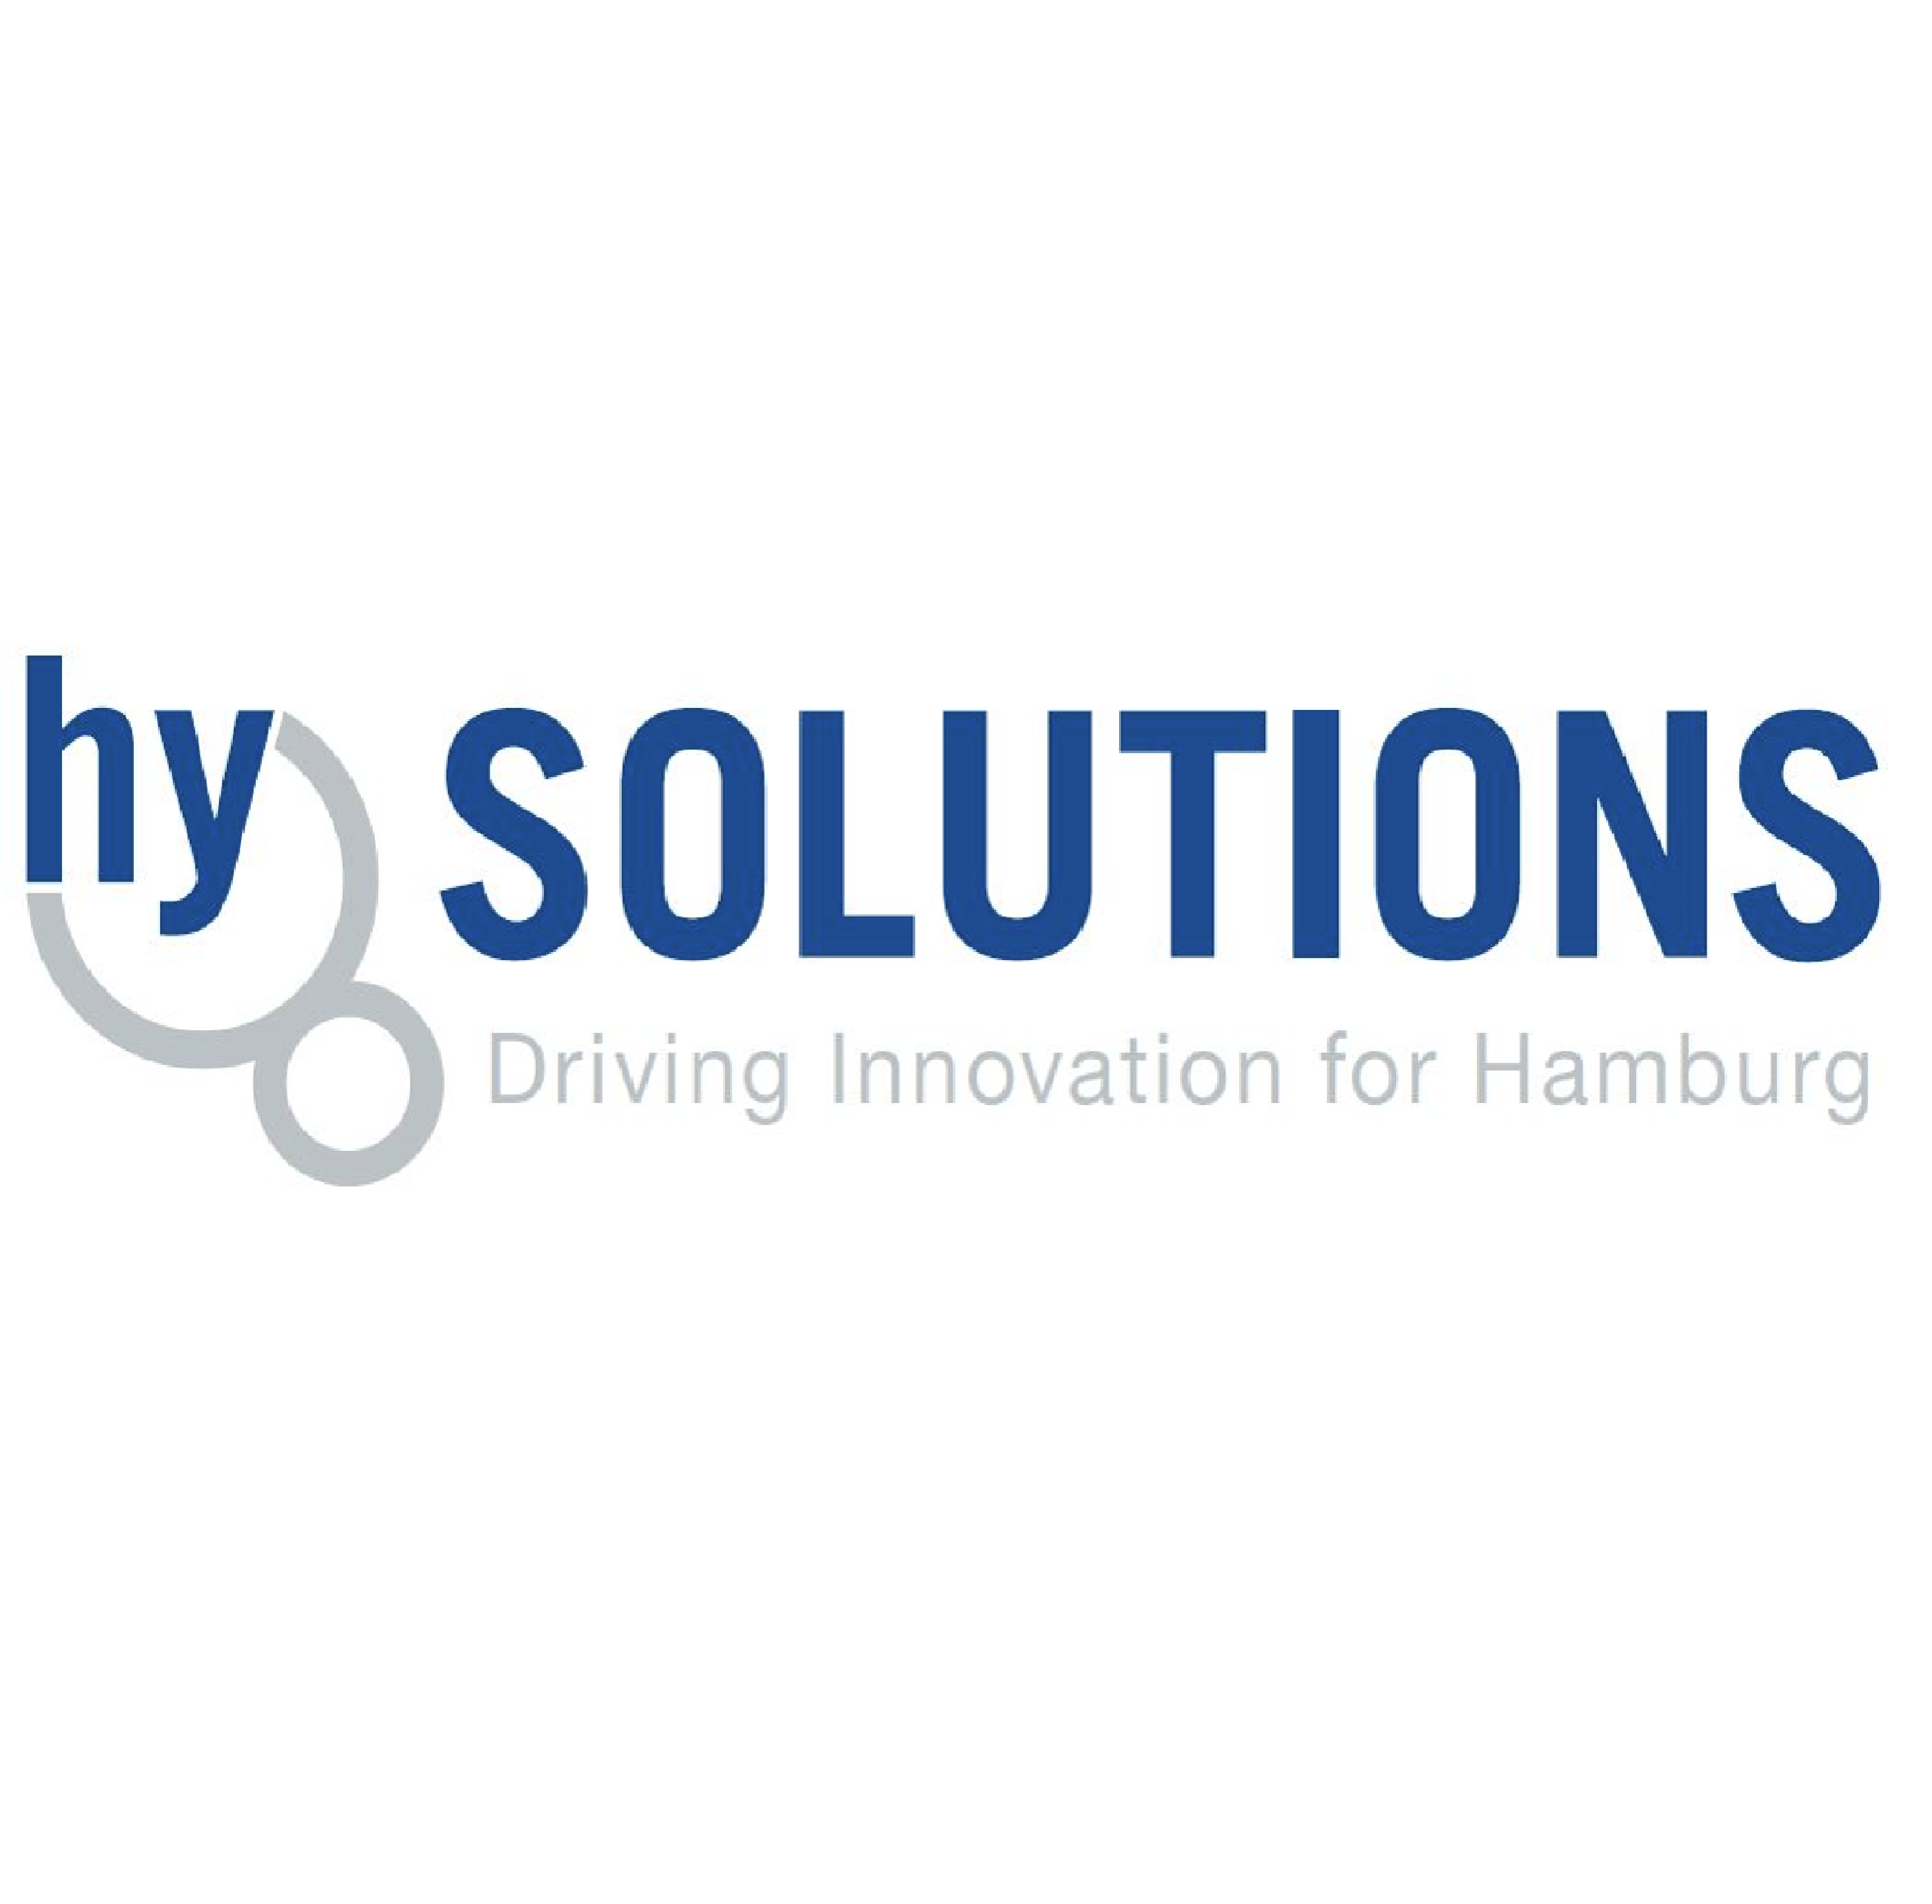 hySOLUTIONS